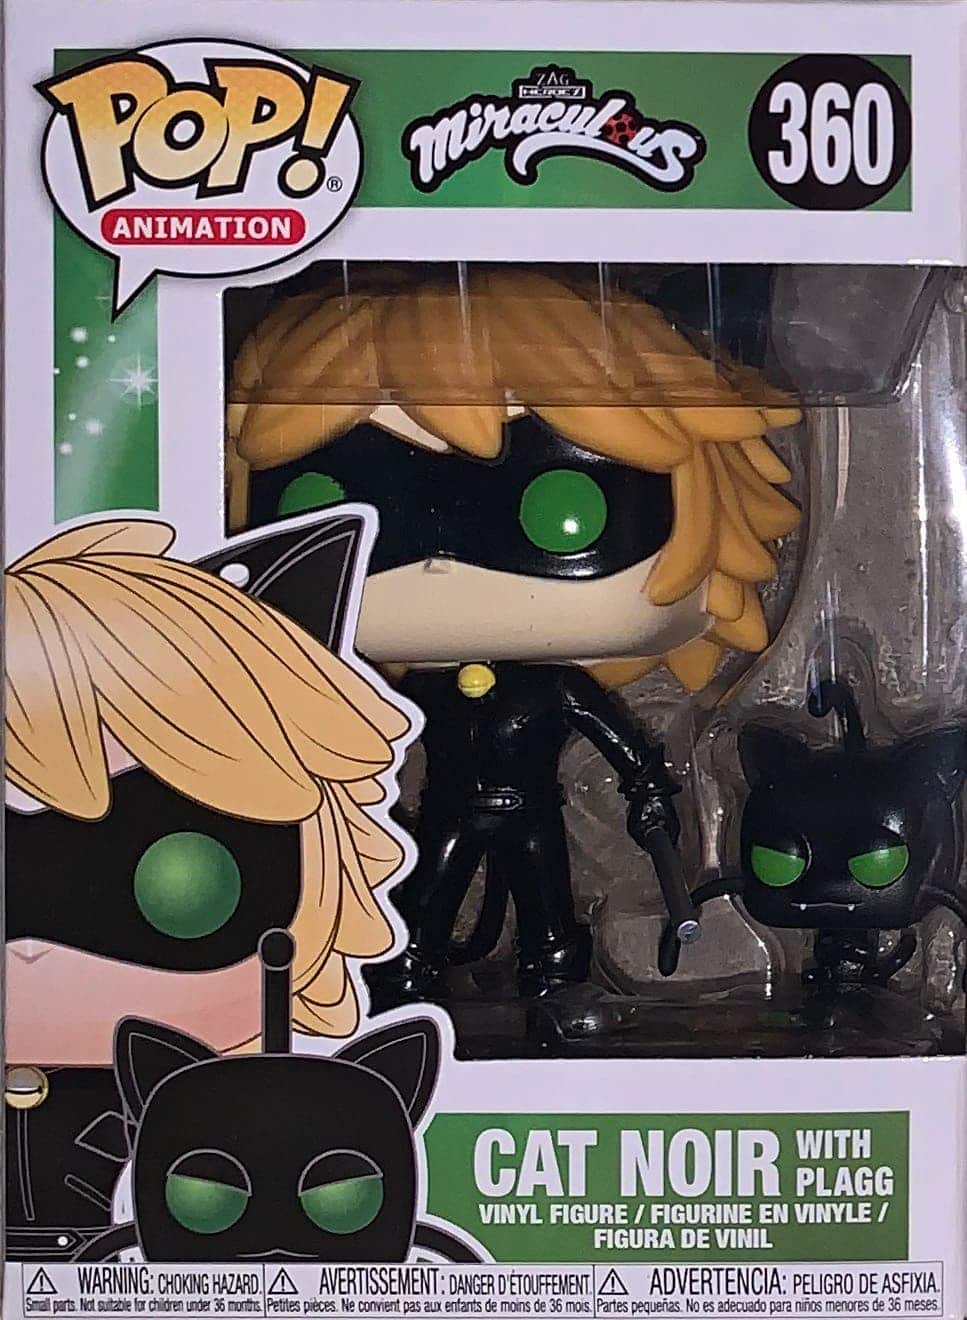 Funko Pop Cat Noir Cheaper Than Retail Price Buy Clothing Accessories And Lifestyle Products For Women Men